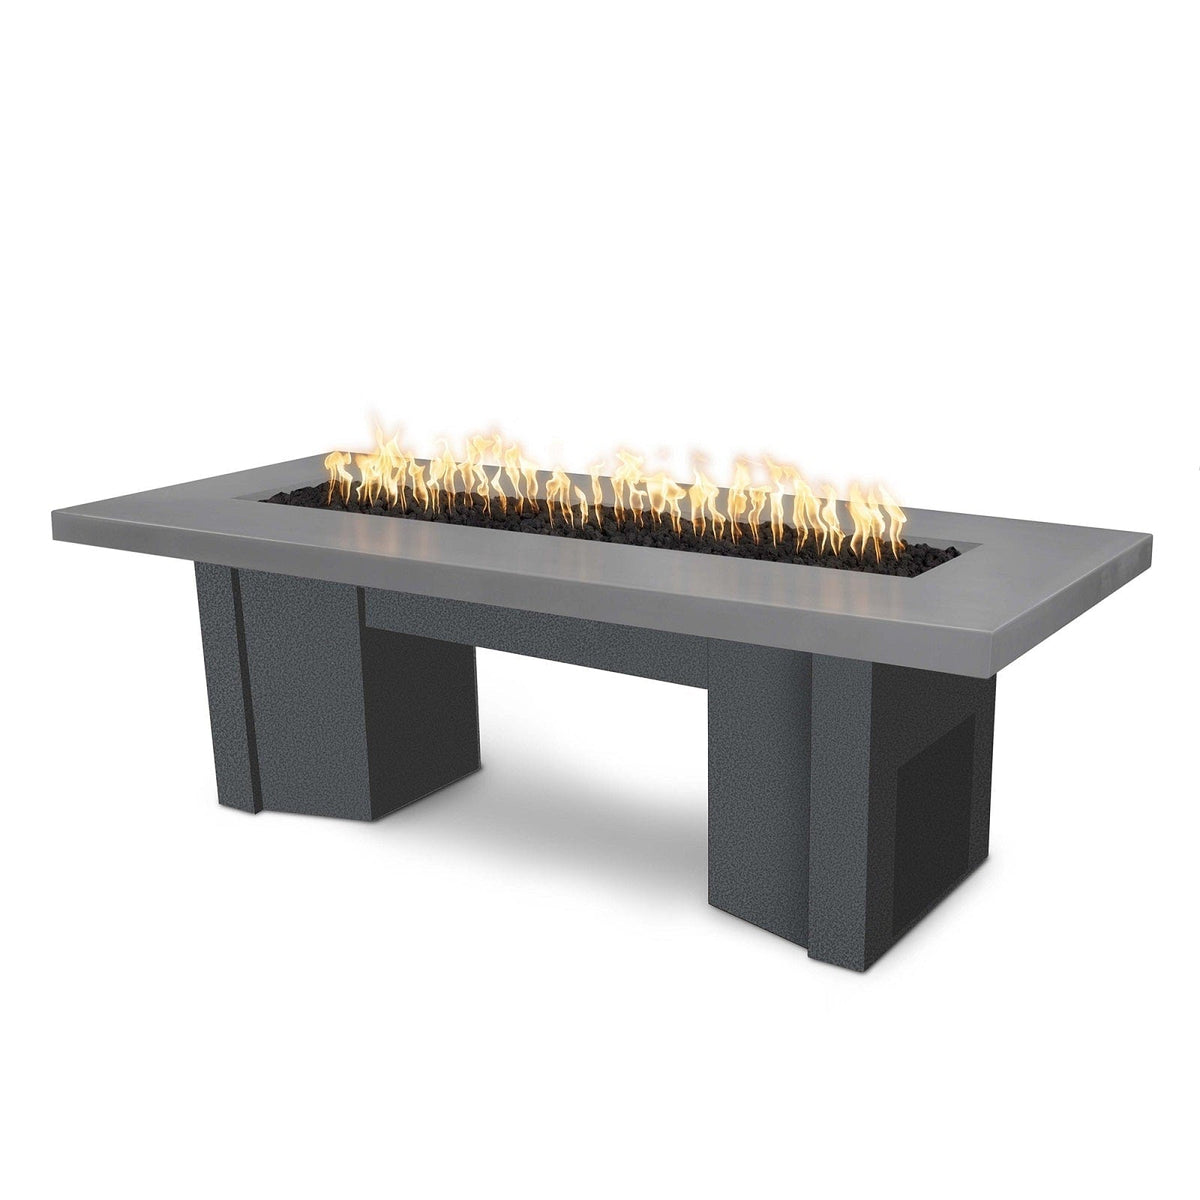 The Outdoor Plus Fire Features Natural Gray (-NGY) / Silver Vein Powder Coated Steel (-SLV) The Outdoor Plus 60&quot; Alameda Fire Table Smooth Concrete in Natural Gas - 110V Plug &amp; Play Electronic Ignition / OPT-ALMGFRC60EKIT-NG